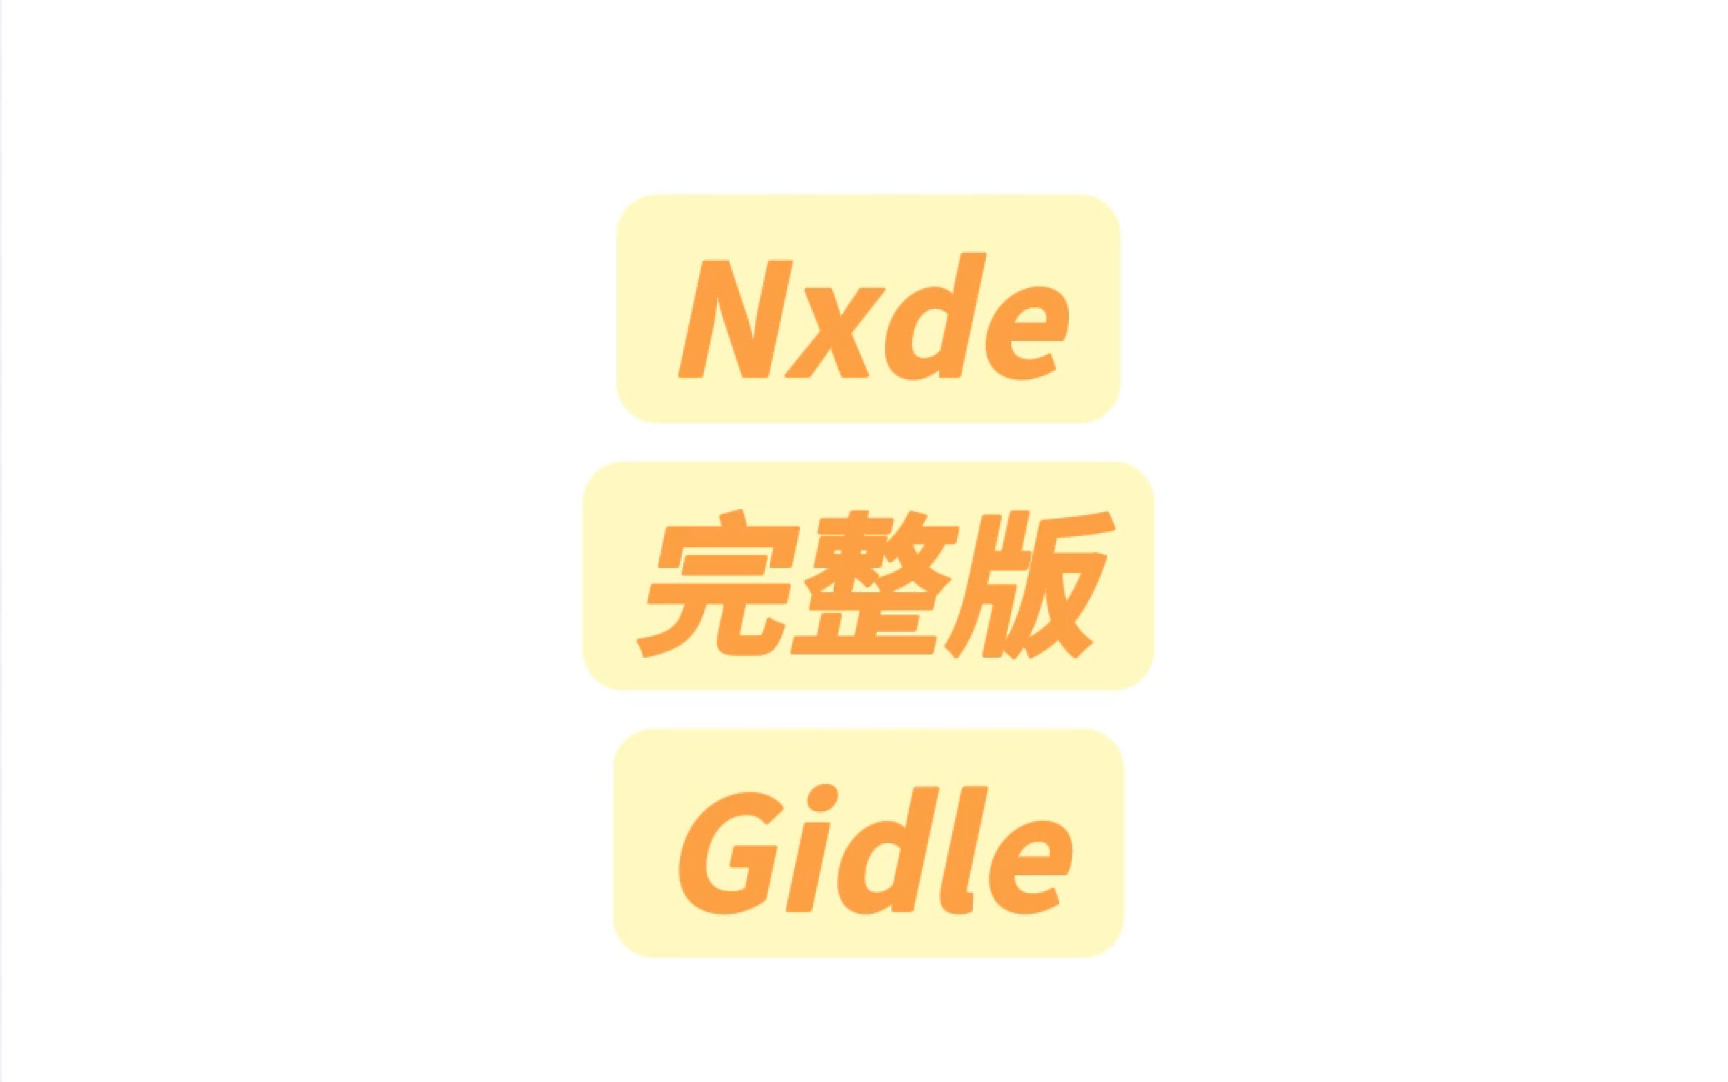 Nxde完整版Gidle纯享版音译教学#gidle #nxde #gidle回归